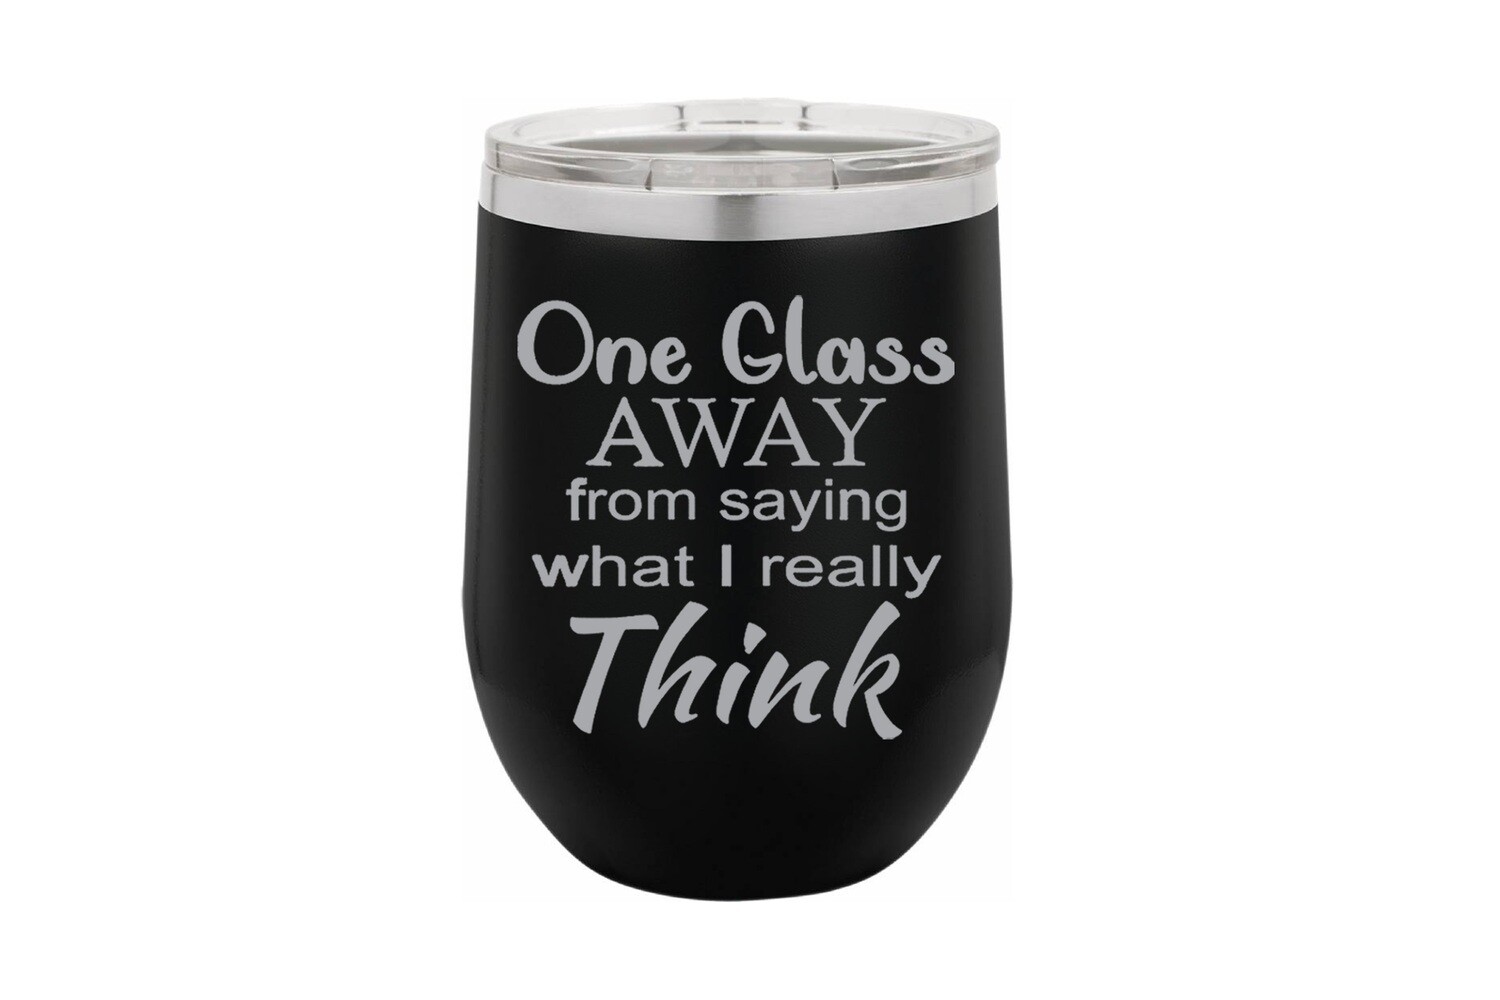 "One Glass Away from Saying What I really Think" Insulated Tumbler 12 oz